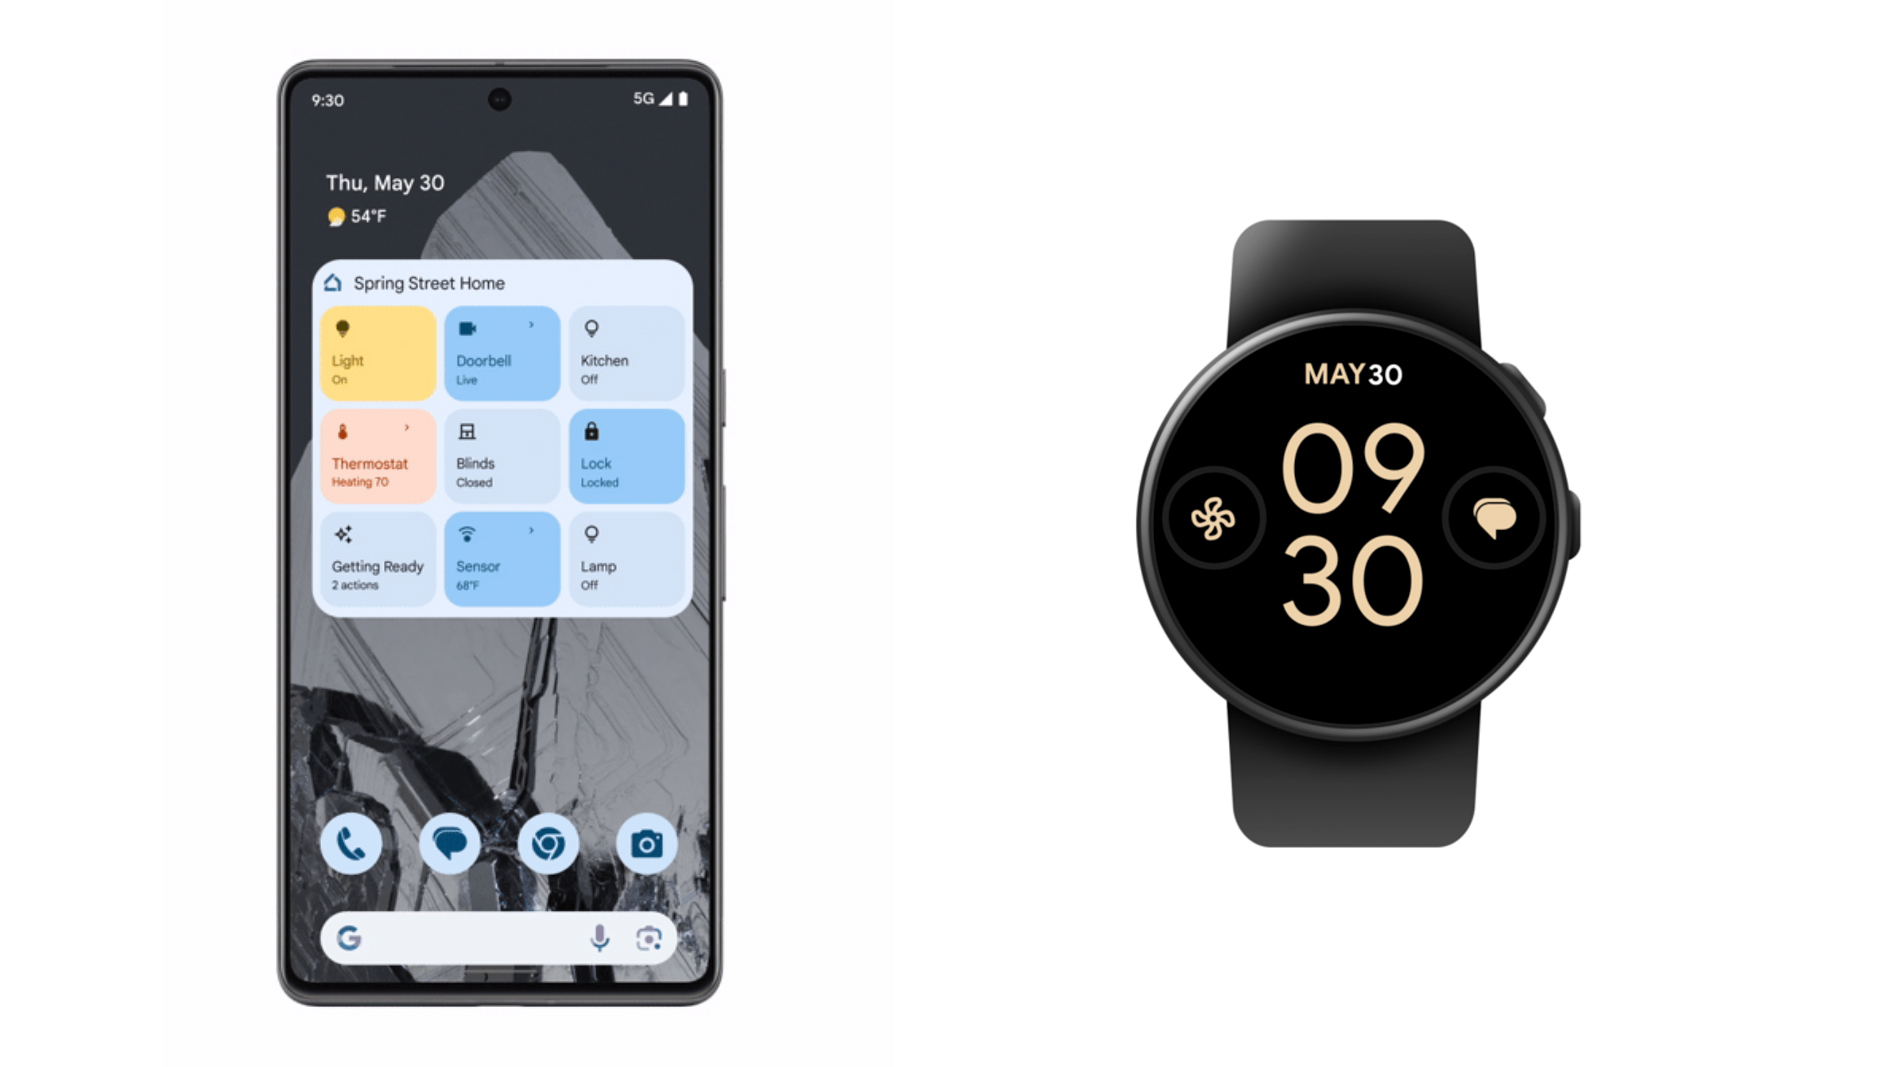 Left: A Pixel phone with a Google Home widget on its home screen. Right: A Pixel Watch with a Google Home complication (fan icon) to the left of the time.